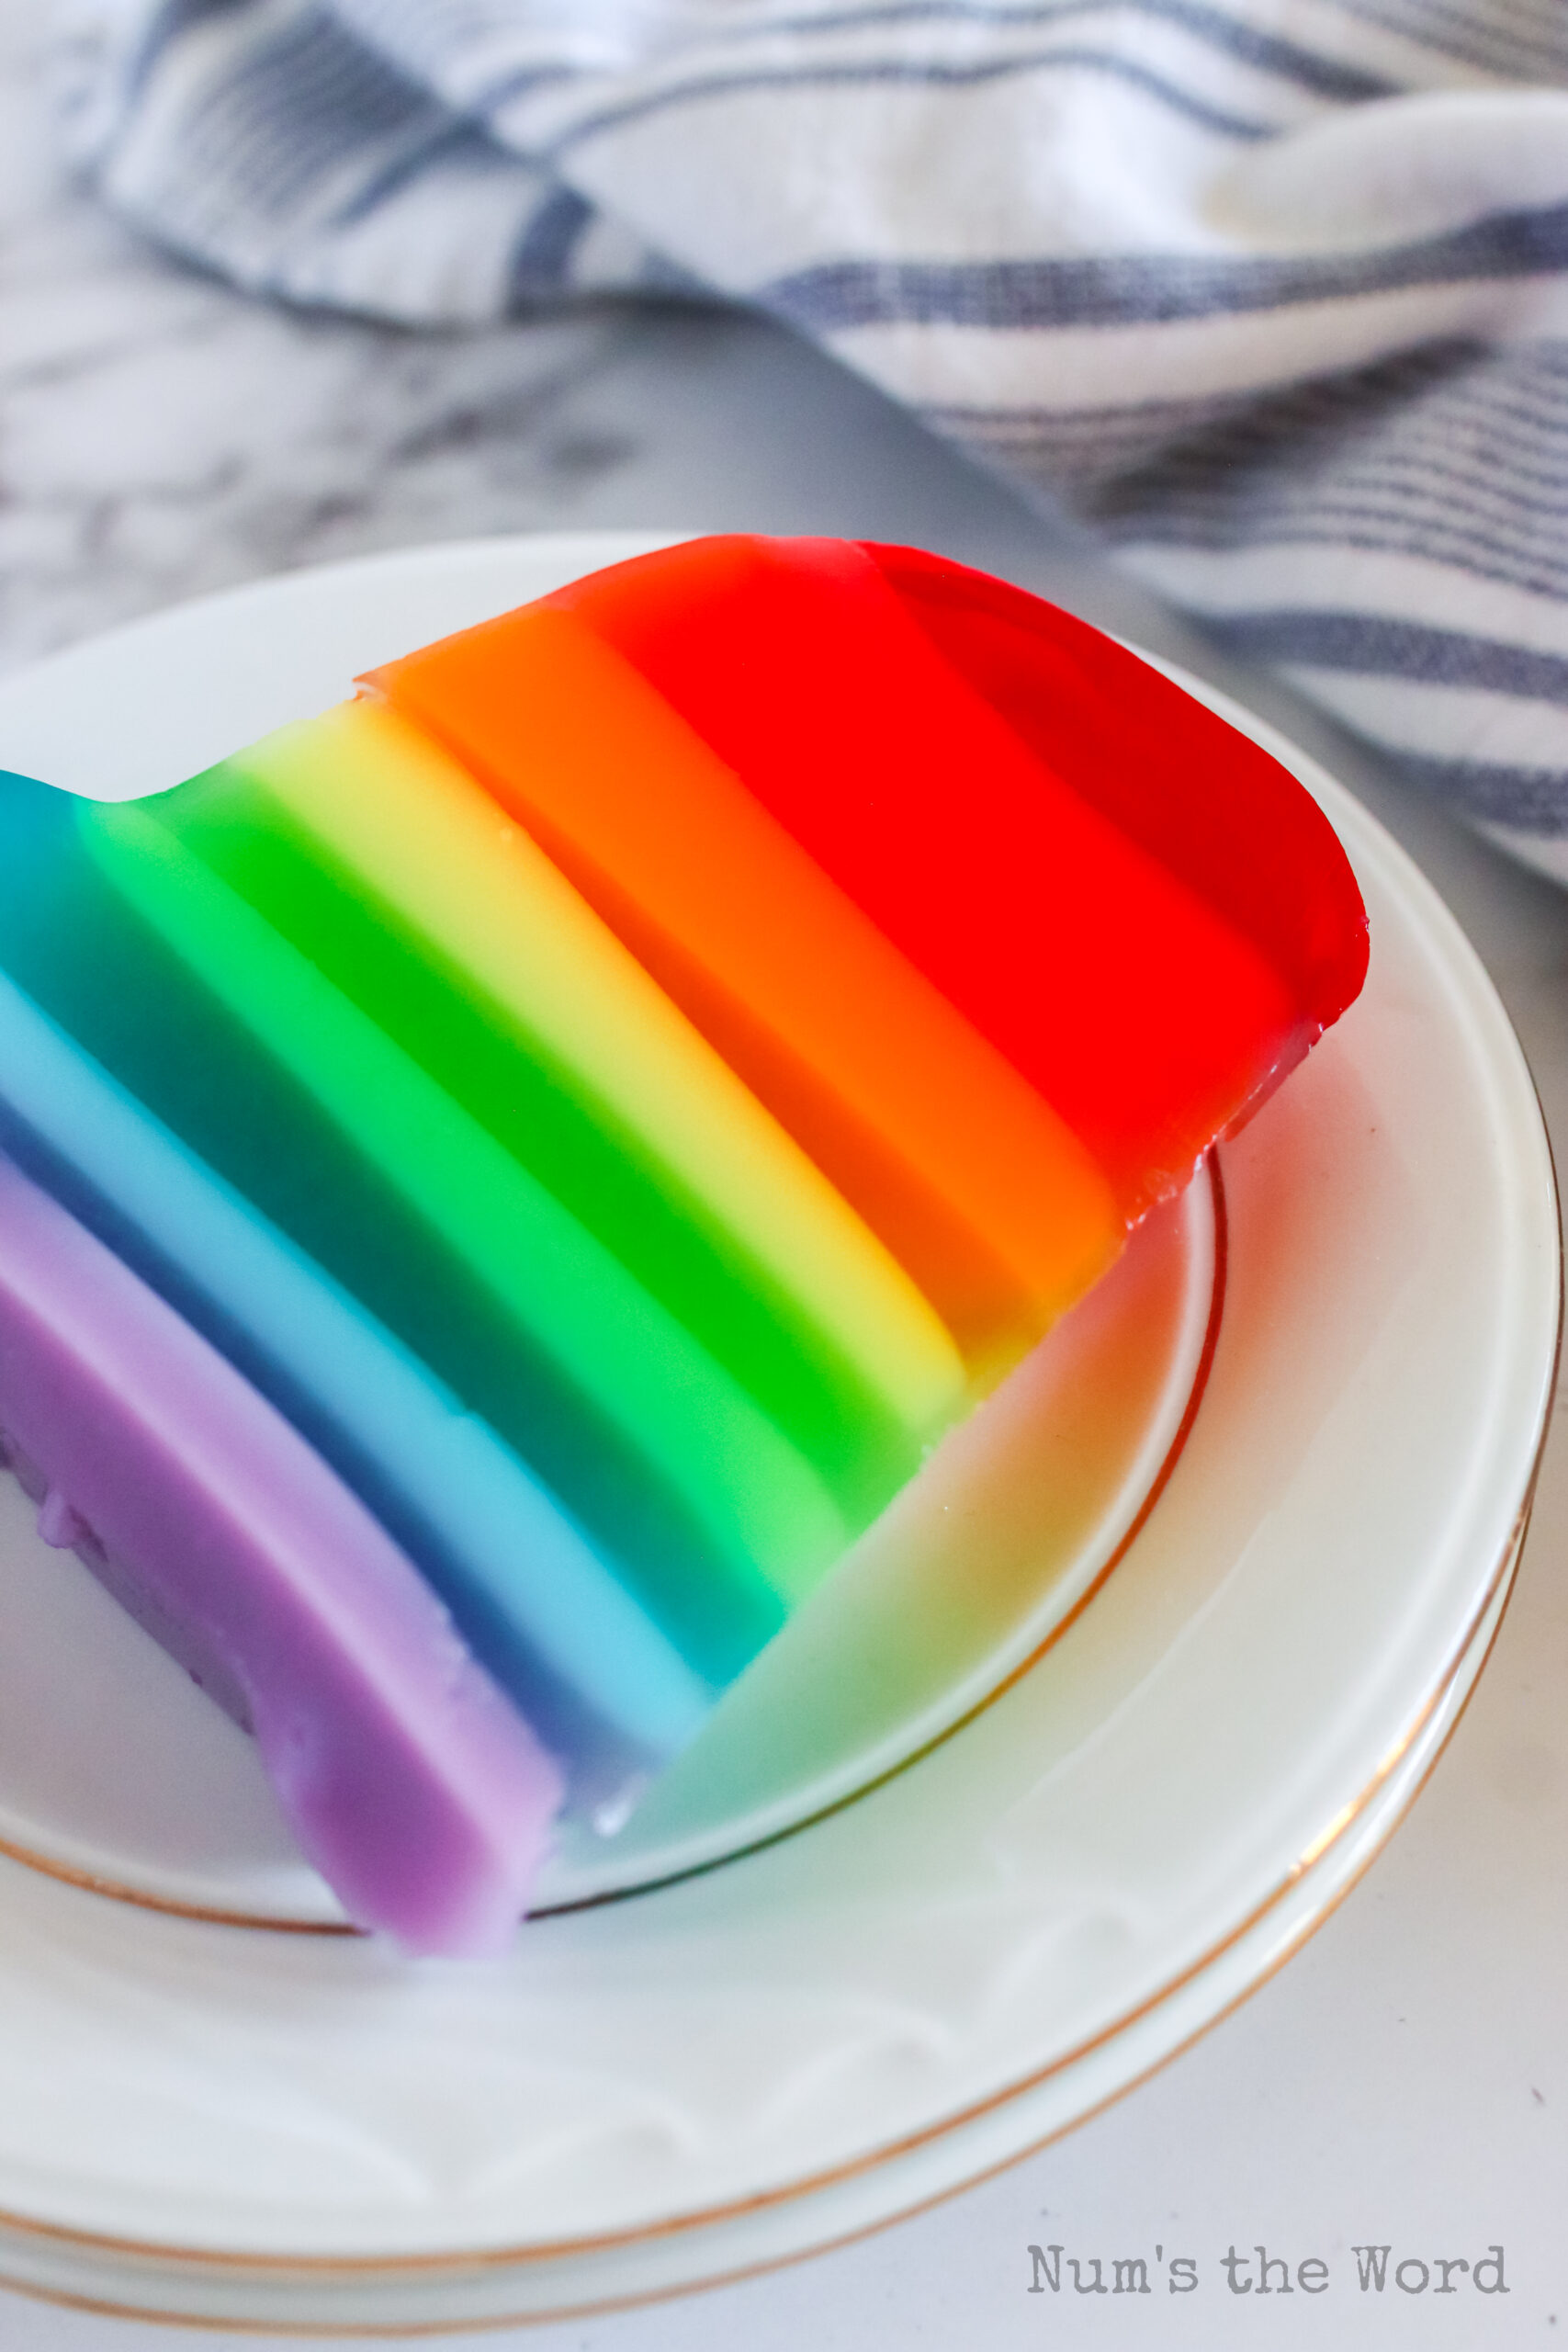 A slice of jello on a plate, showing layers.